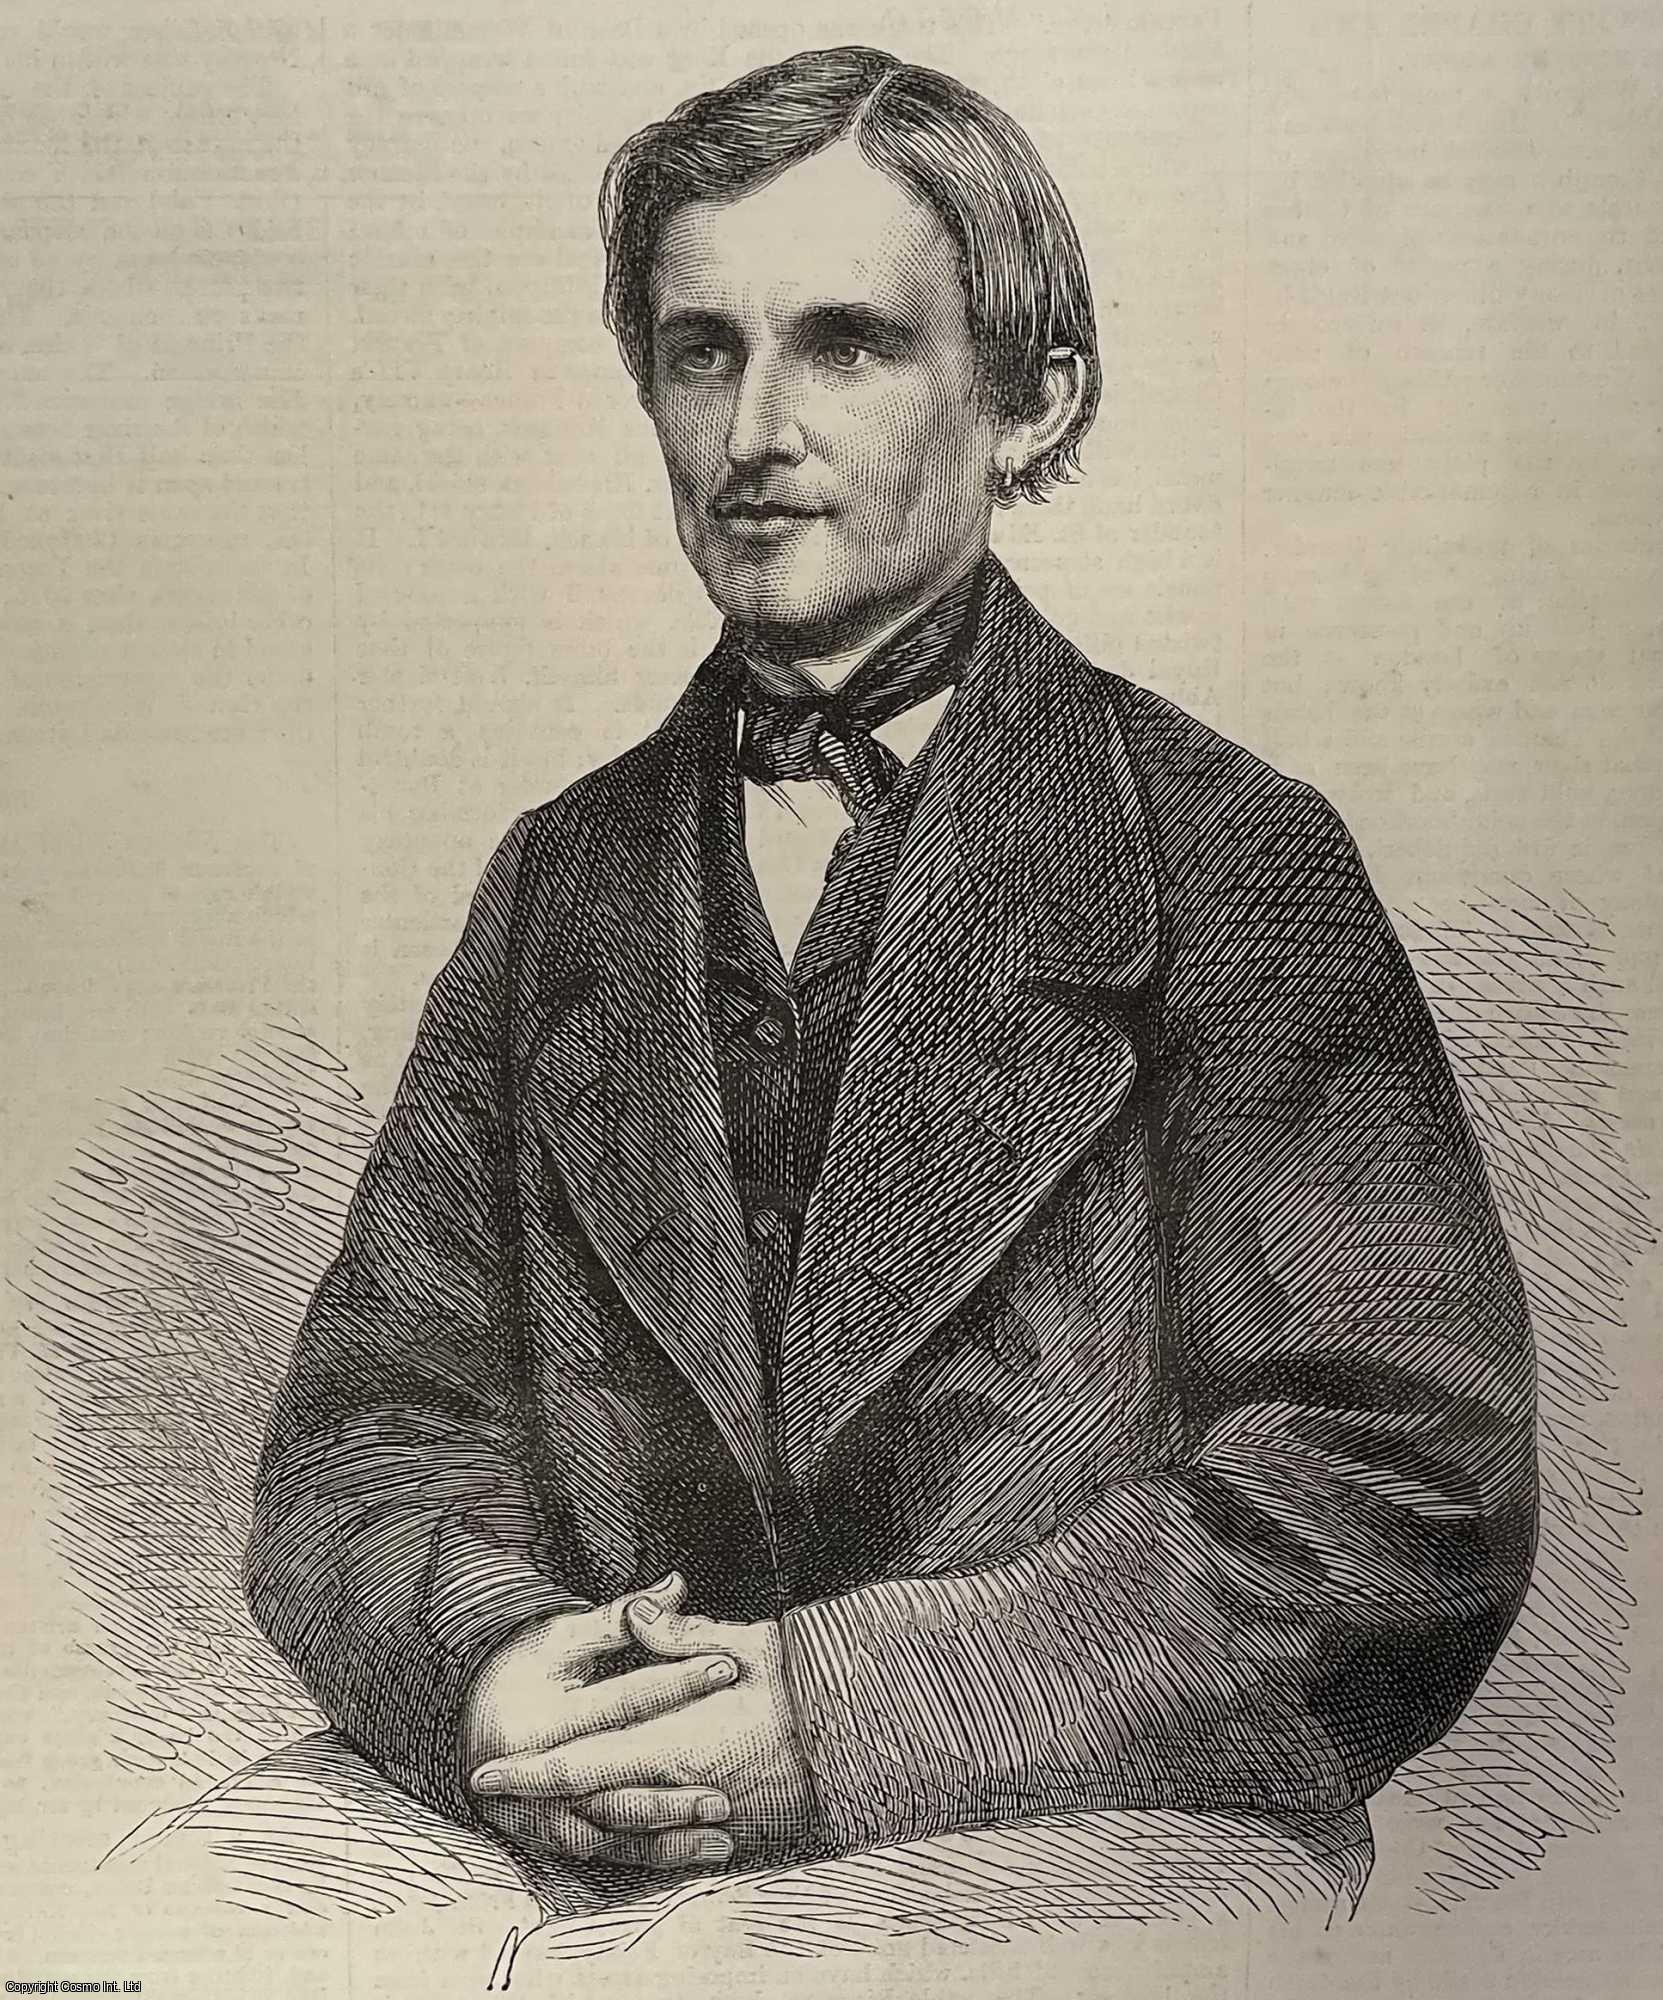 PORTRAIT - Ossip Ivanoff Kommissaroff Kostromskoi; the Enobled Peasant who Saved the Czar's Life. An original print and accompanying article from the Illustrated London News, 1866.